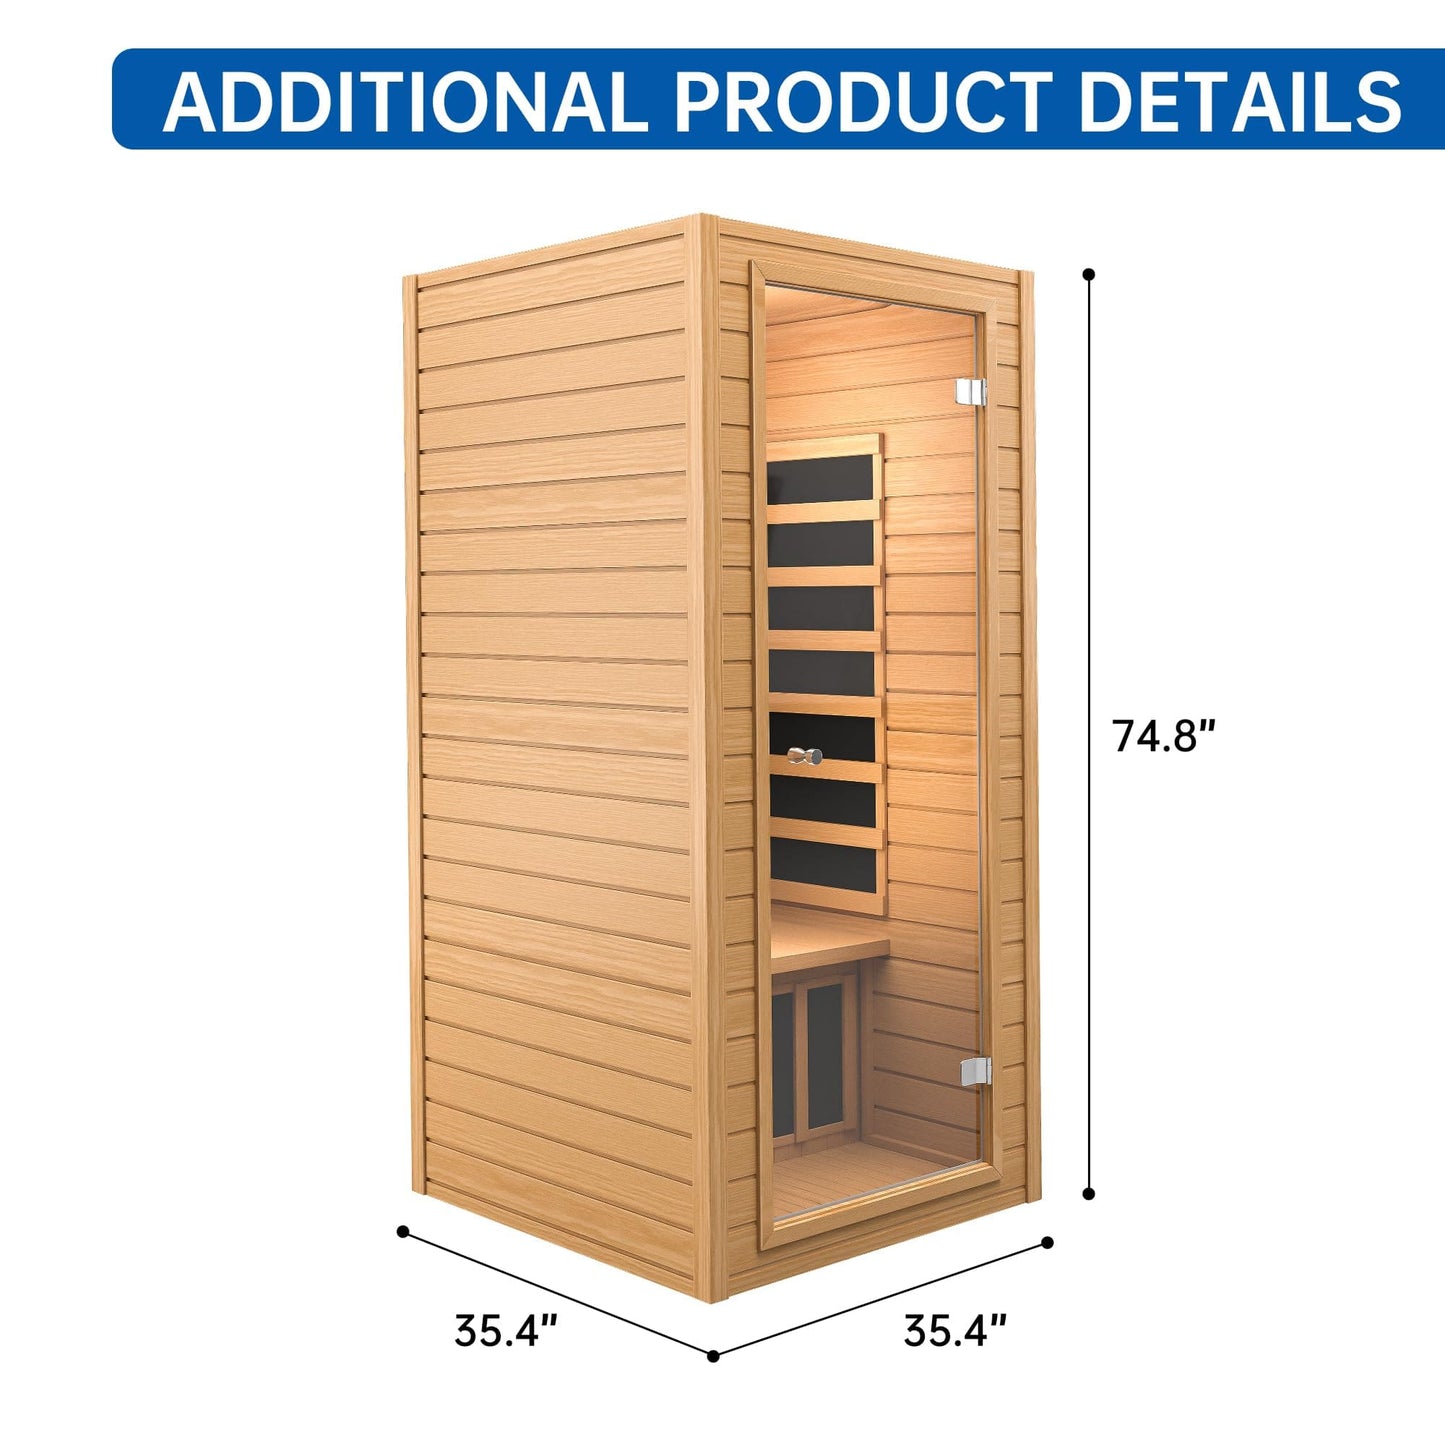 RESTISLAND MASSAGERS Canadian Hemlock Wood Far Infrared Sauna Room of Near Zero EMF, 9 Chromo Therapy Lights, Oxygen Ionizer for Home and Indoor Use, with Bluetooth, LCD Control Pannel